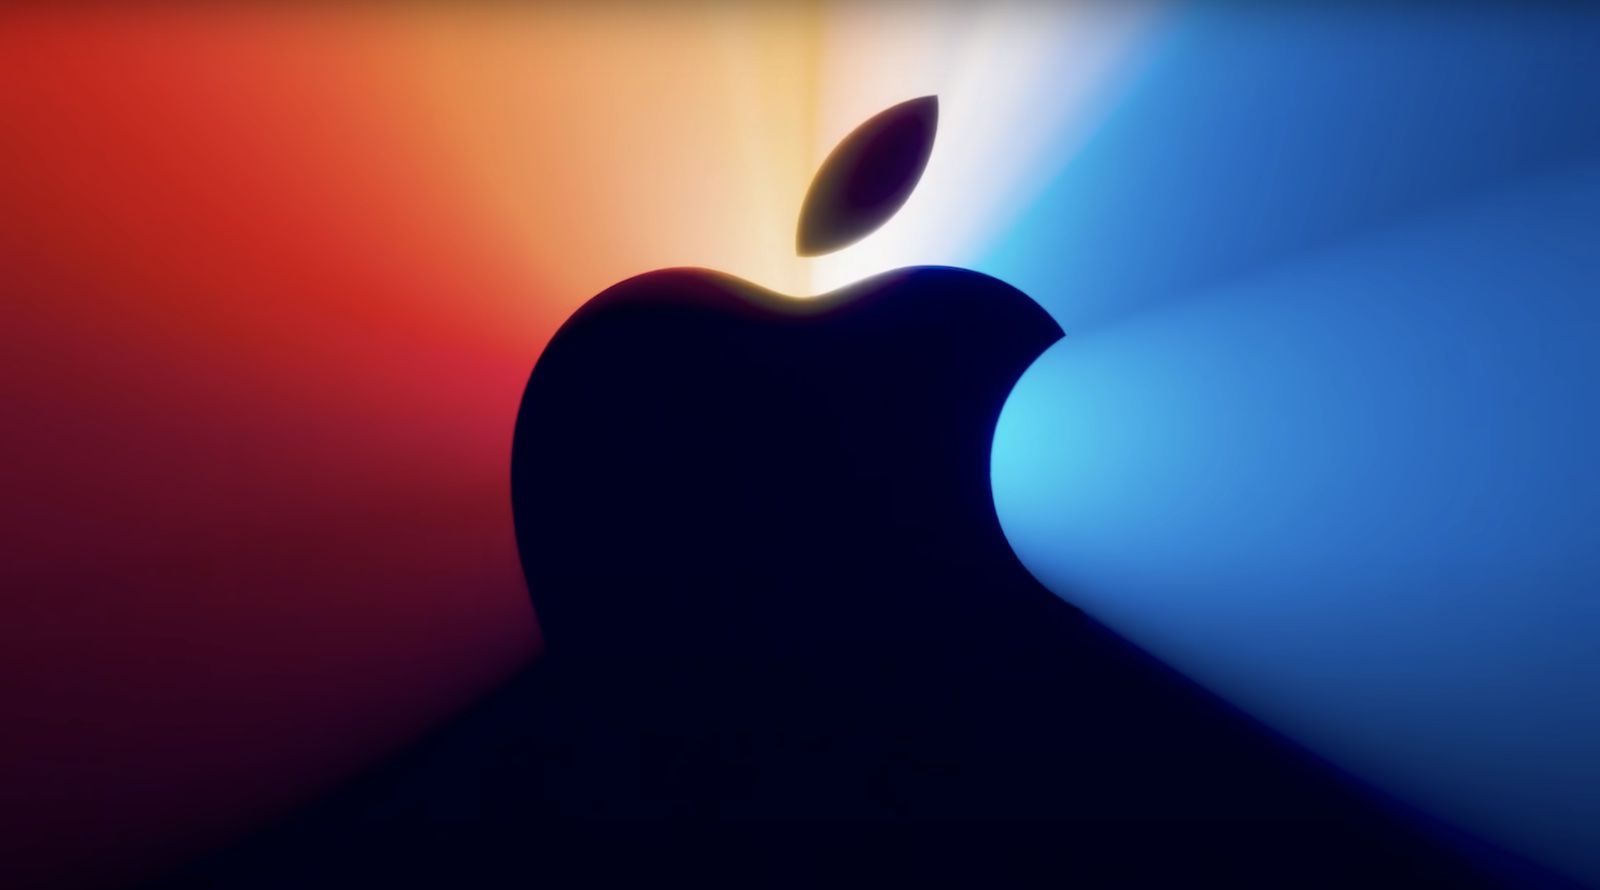 Apple has just broken a 12-year tradition